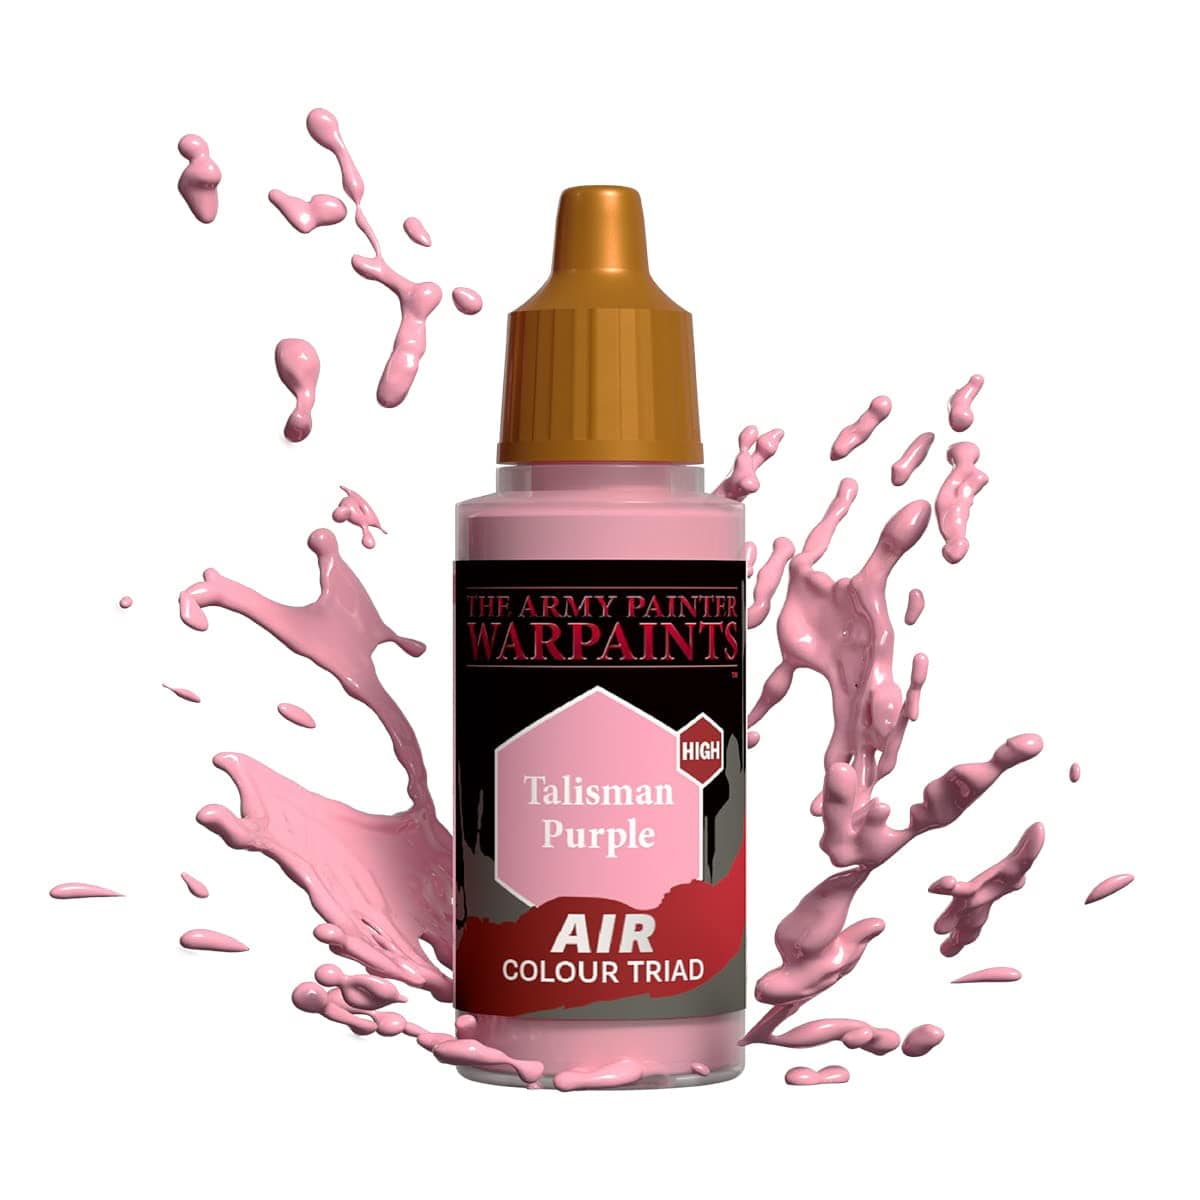 The Army Painter Accessories The Army Painter Warpaints Air: Talisman Purple 18ml